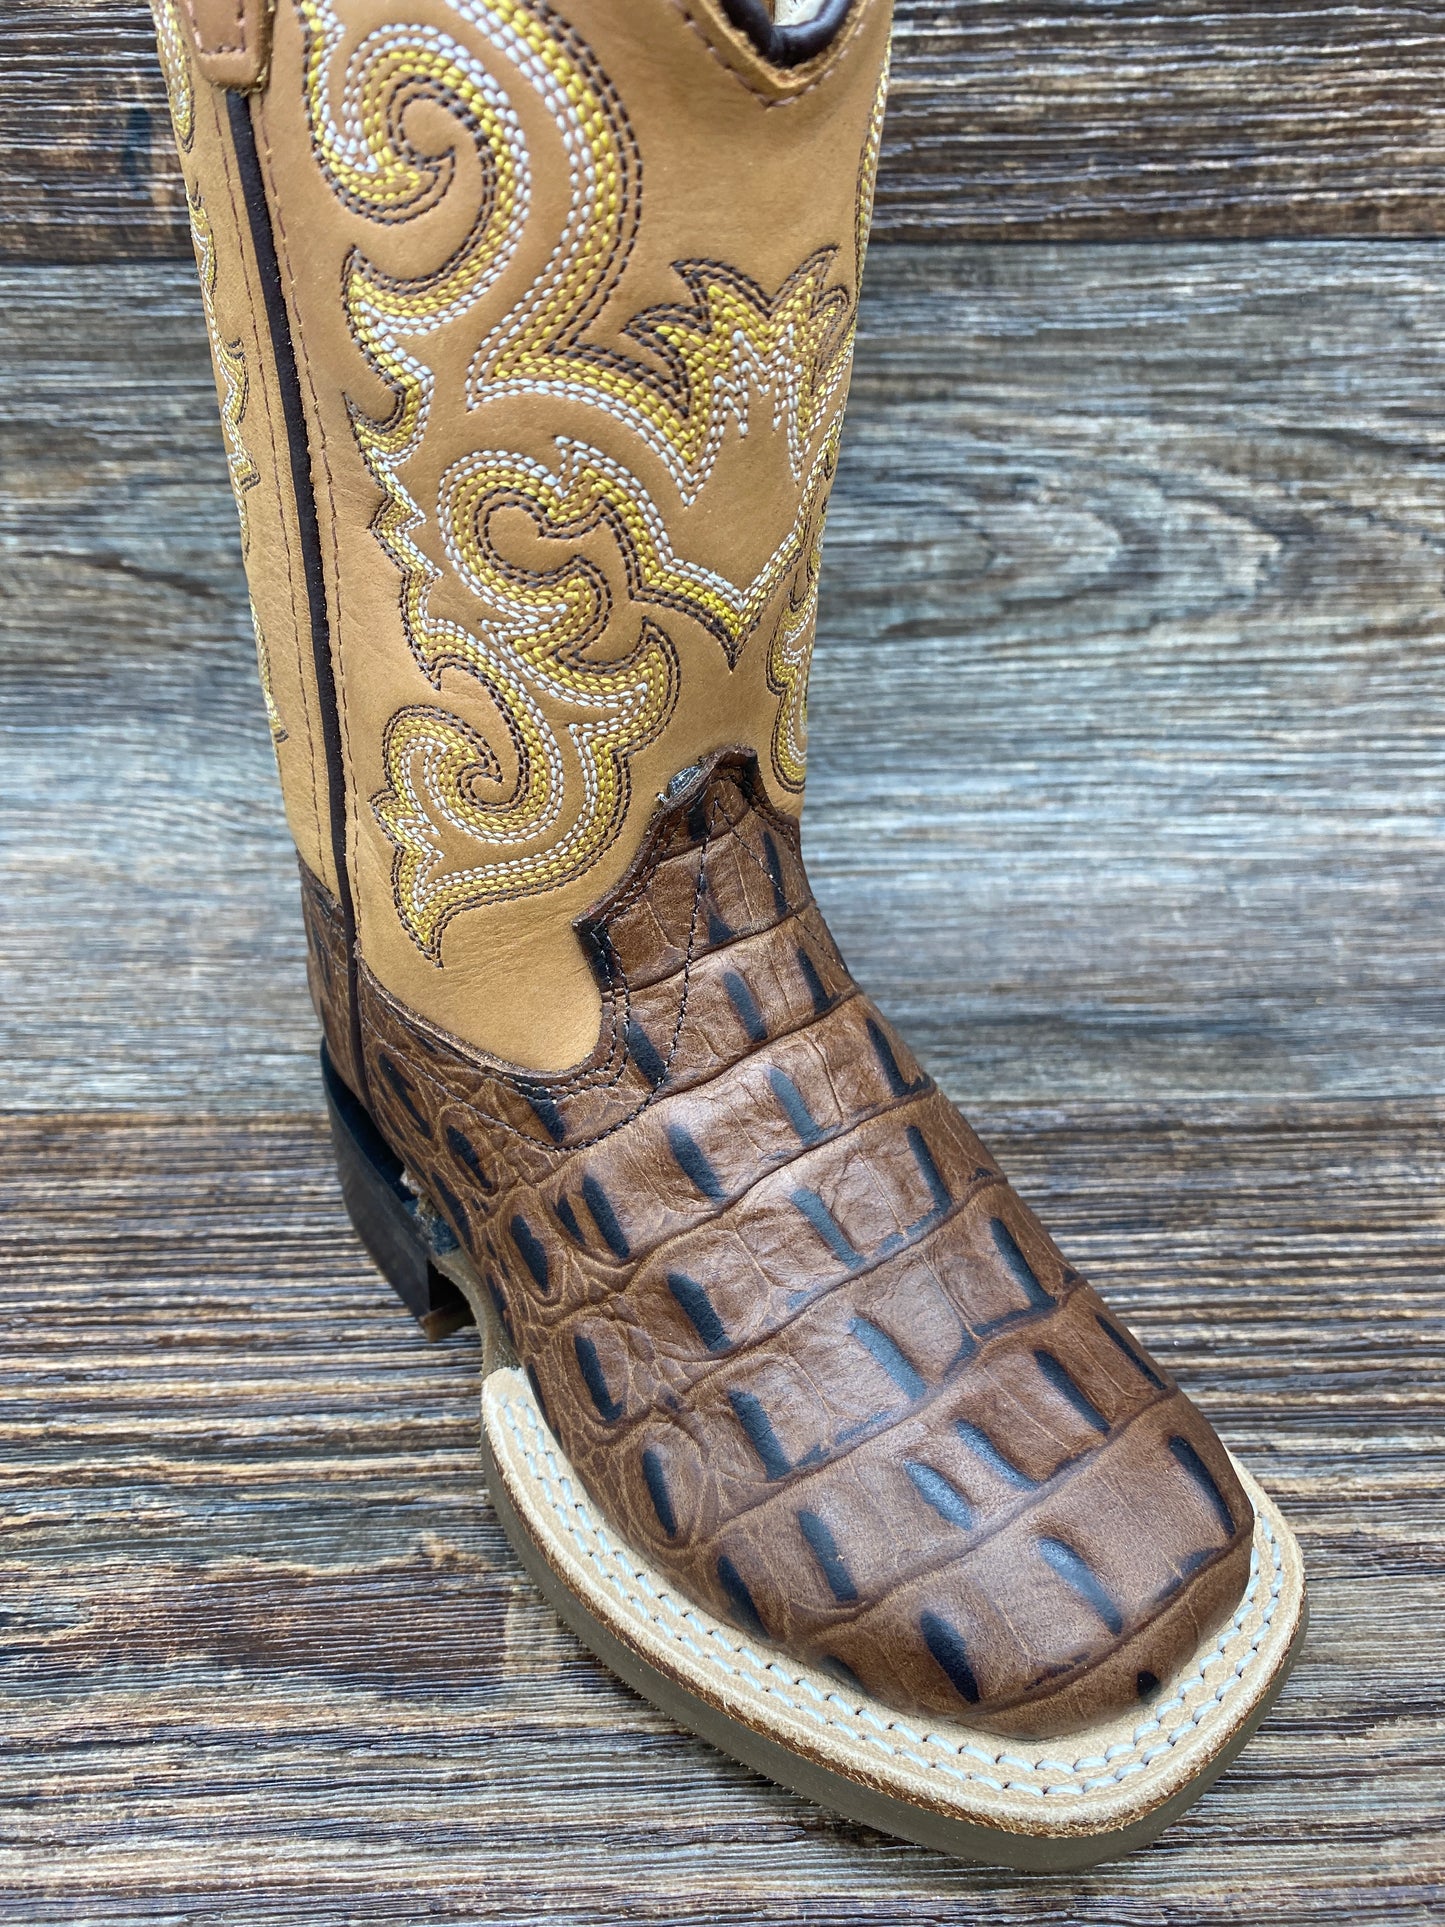 bsc1832 Kid's Alligator Print Square Toe Western Boots by Old West